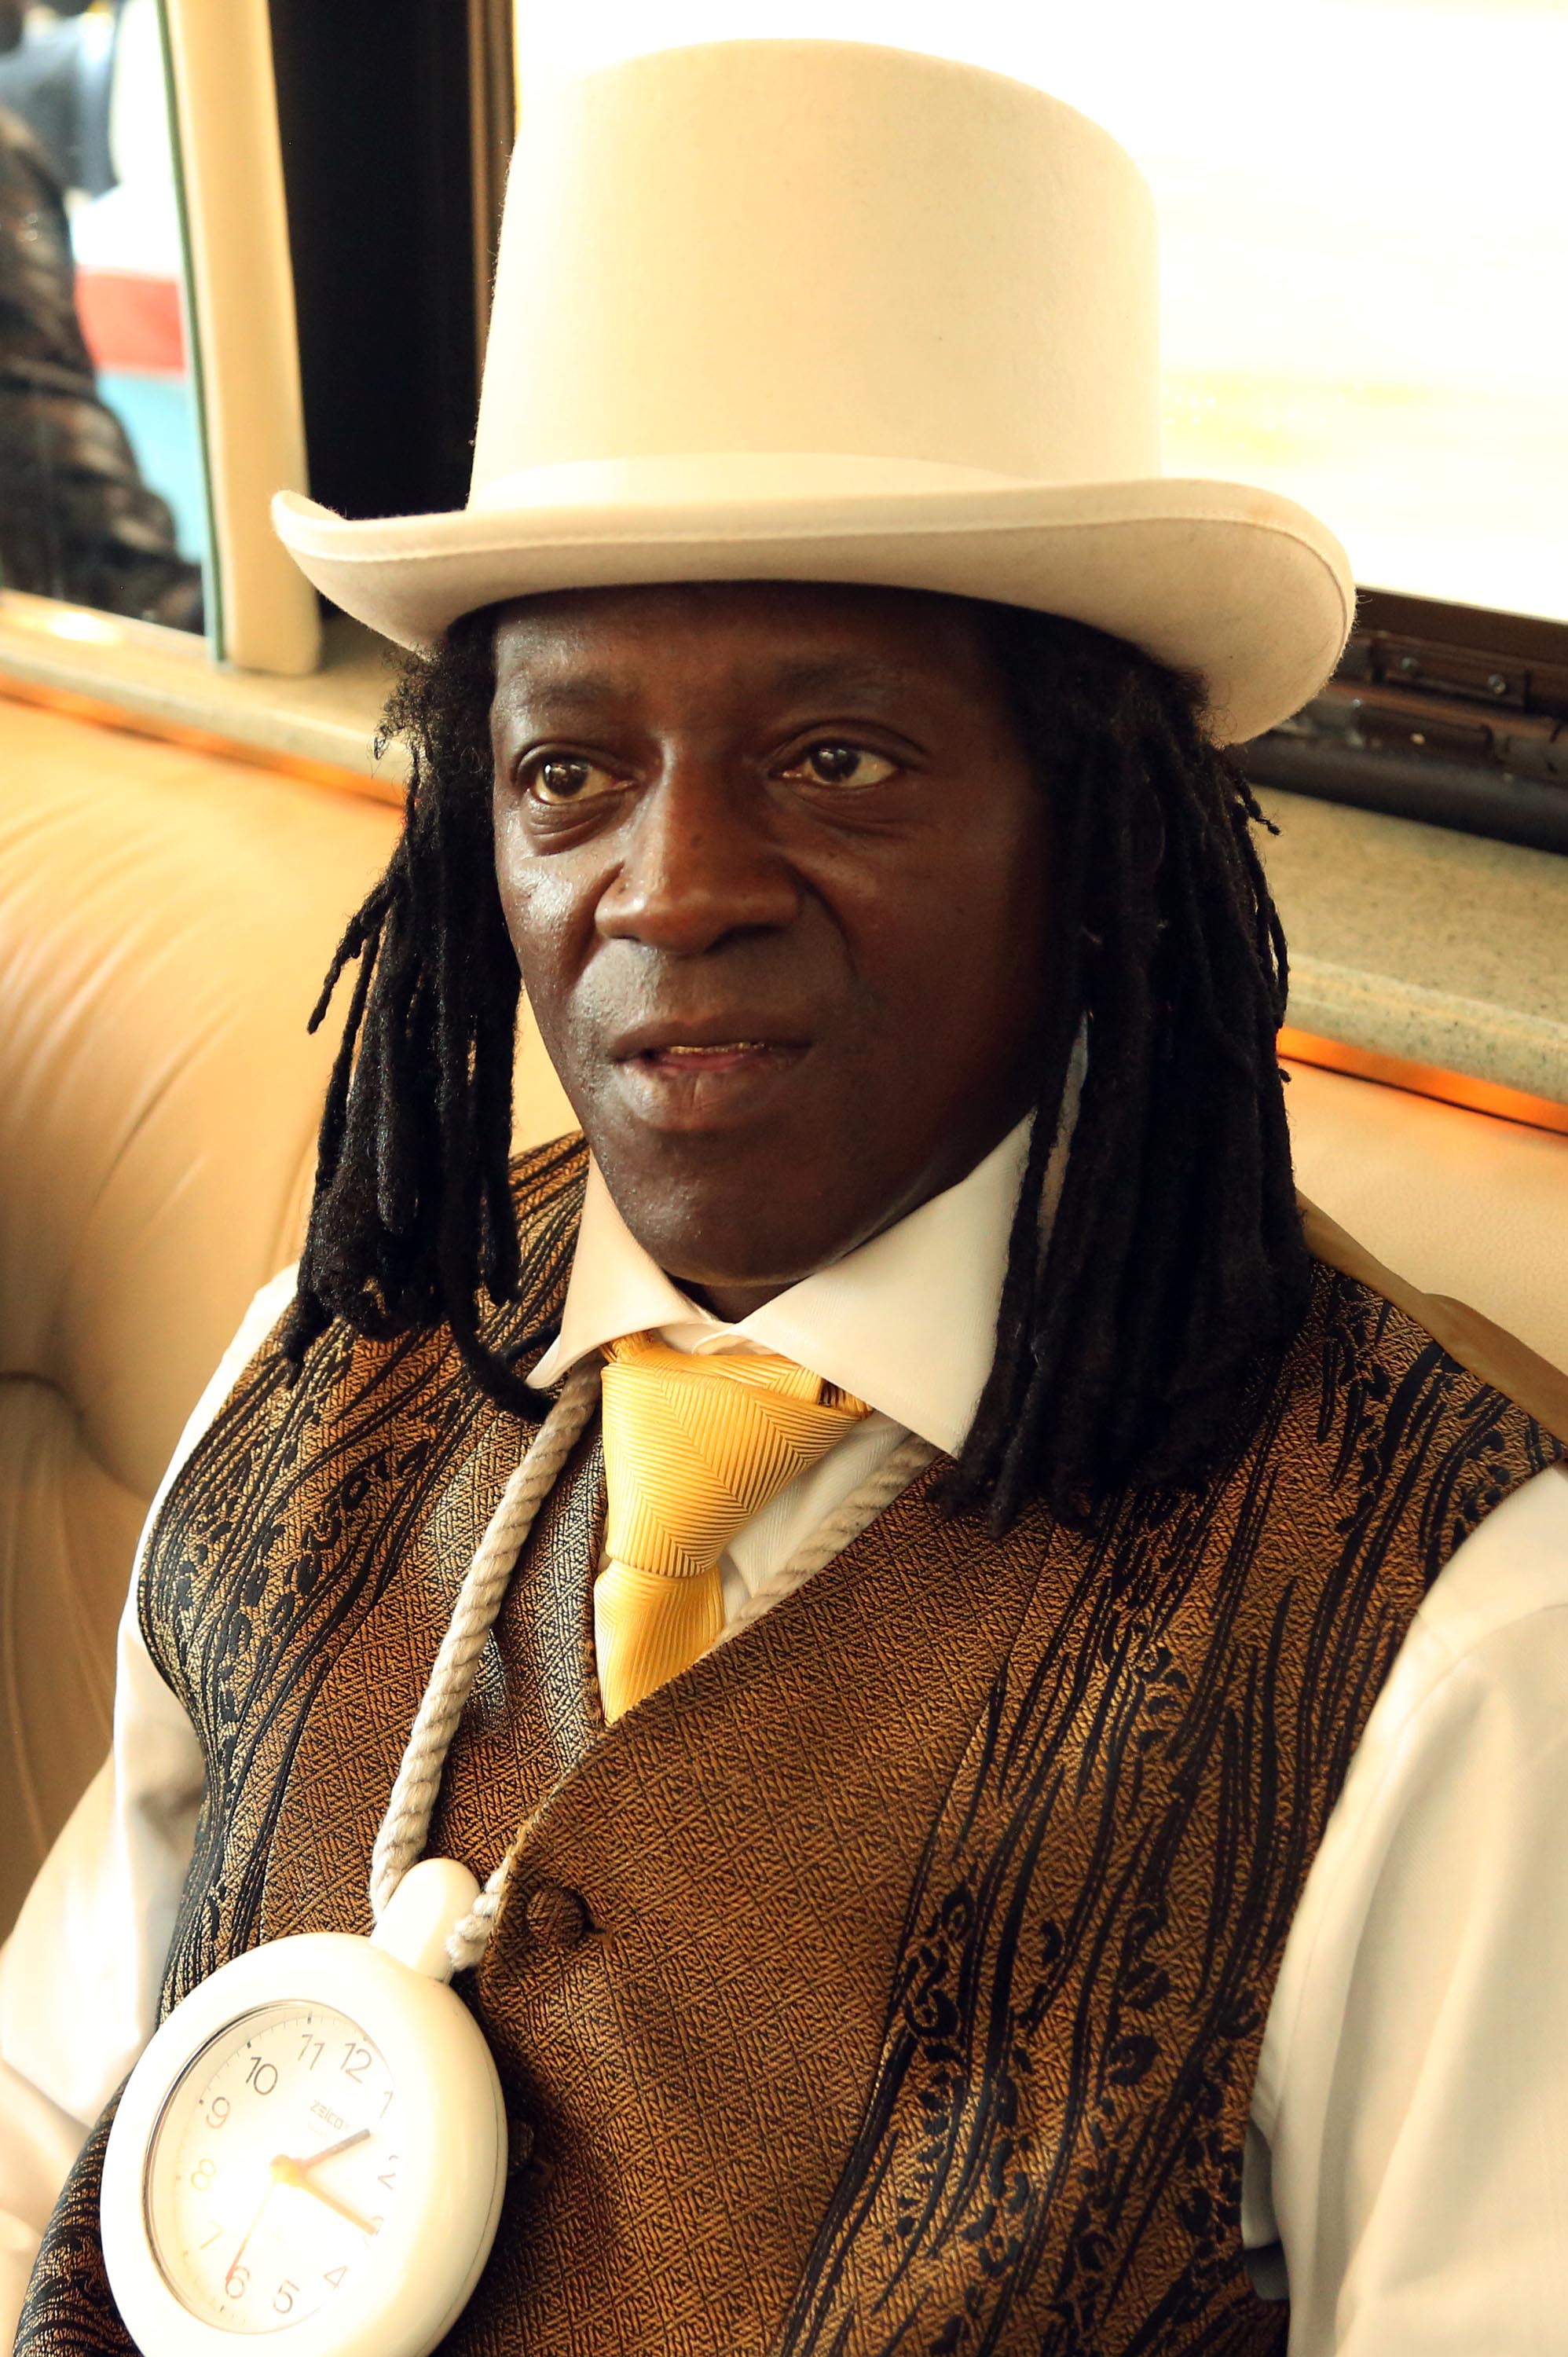 Flavor Flav attends the Centric Celebrates Selma event on March 8, 2015 in Selma, Alabama. (Johnny Nunez—Getty Images)